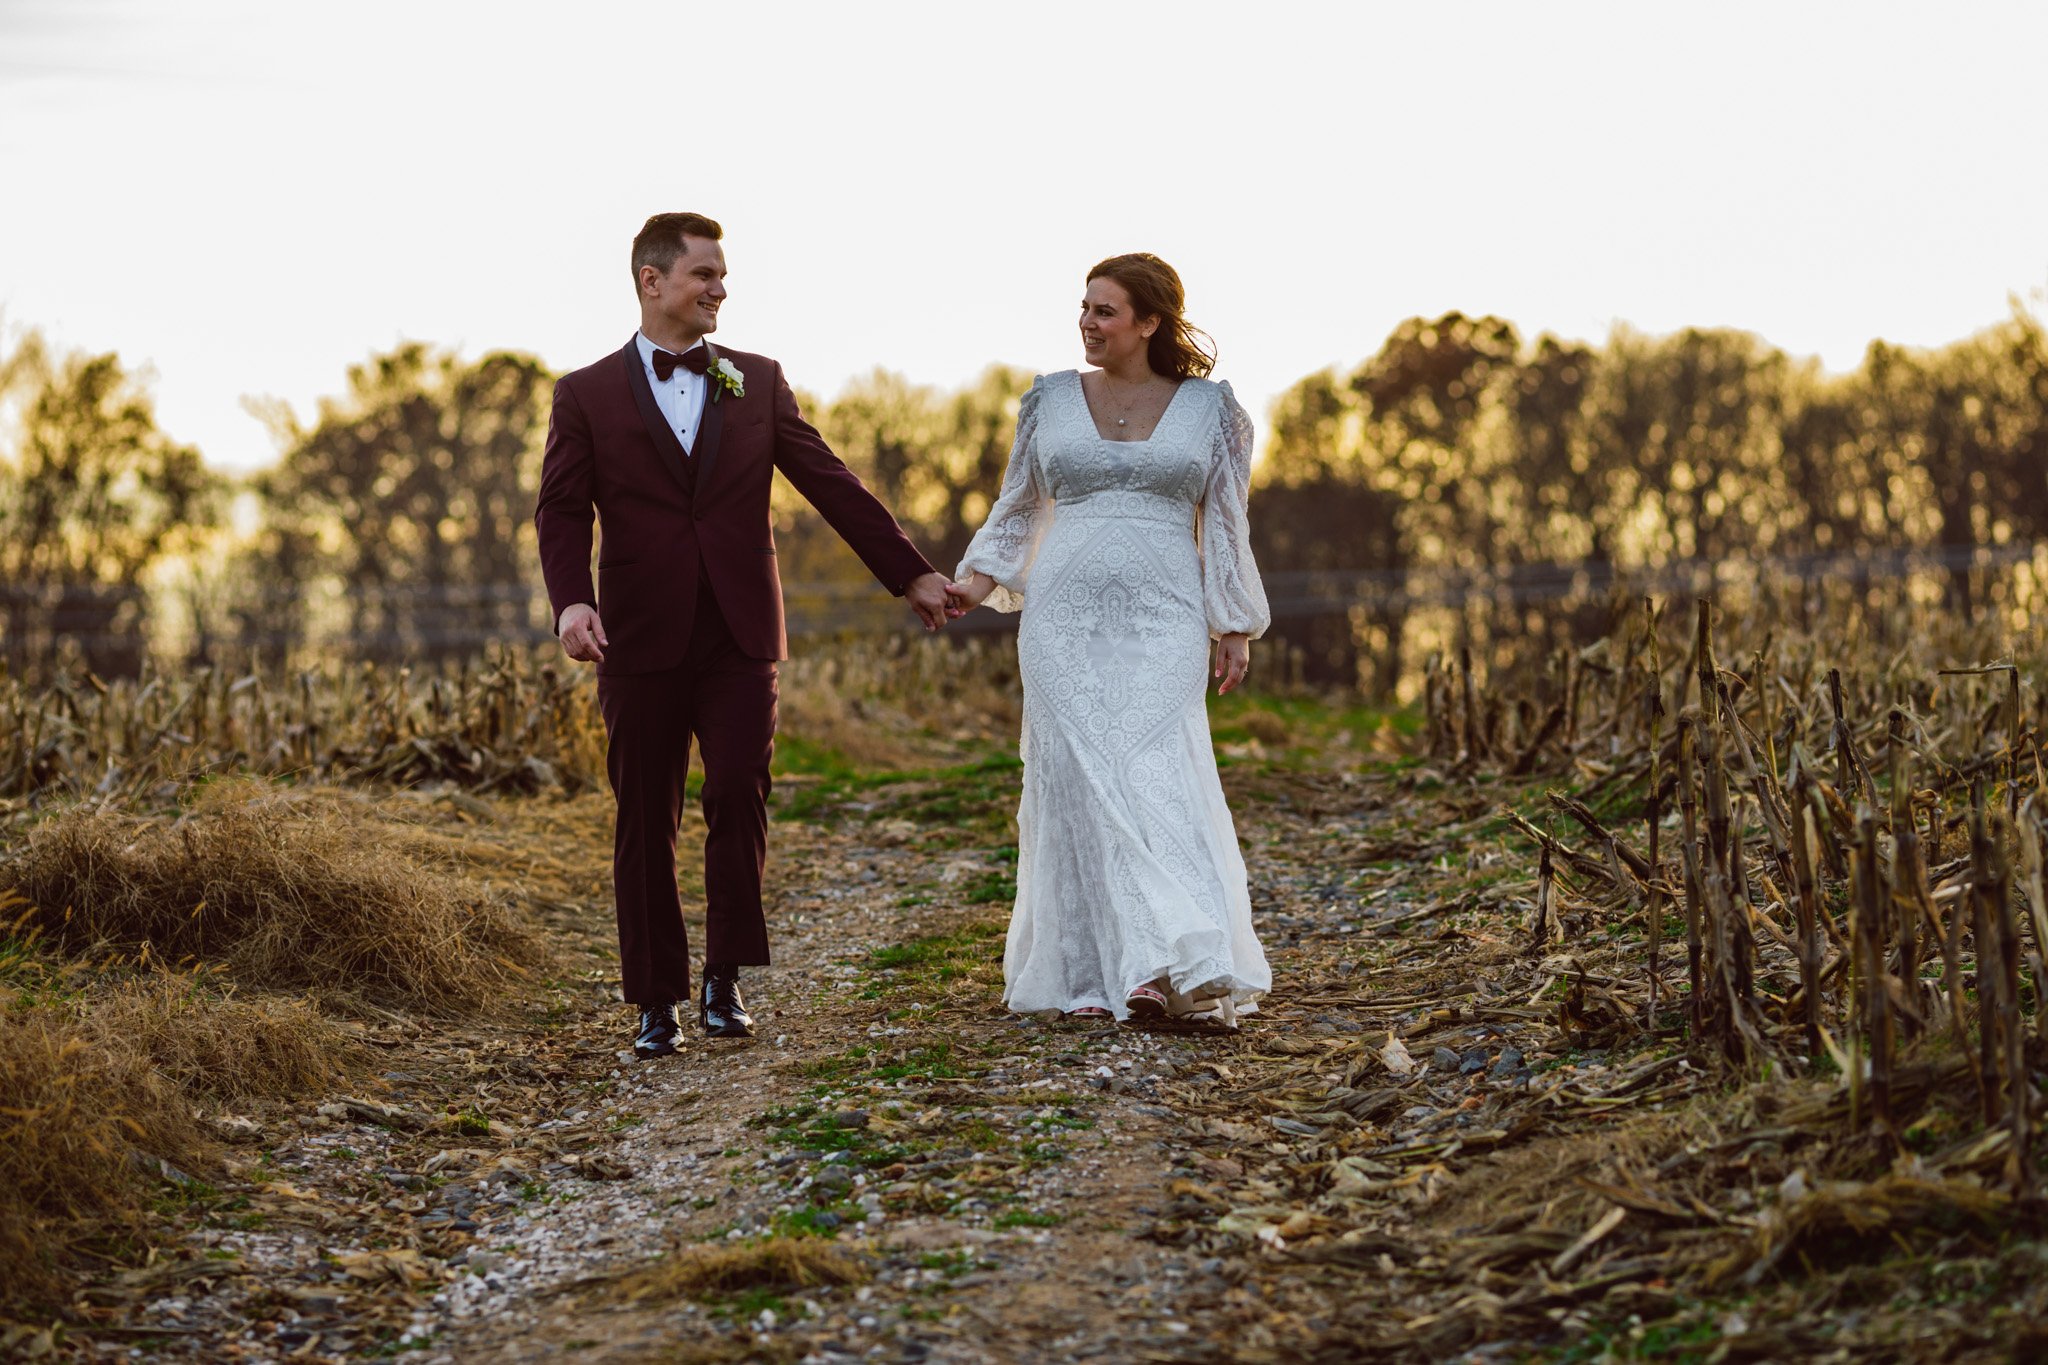 A wedding couple, bride and groom holding hands at sunset atTurner Crossings Farm in Parkton Maryland.